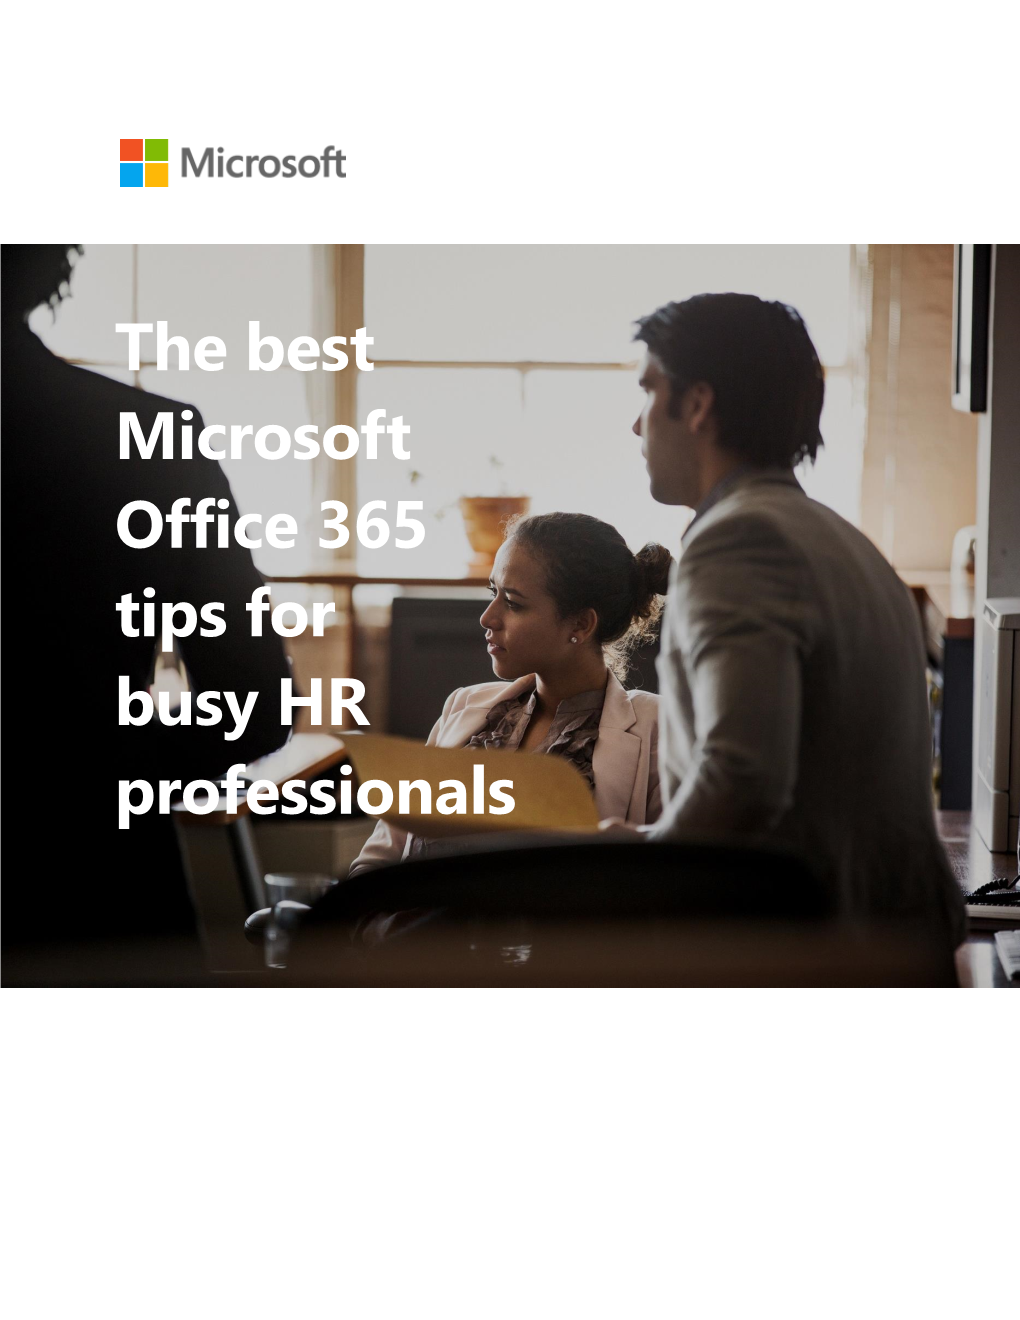 The Best Microsoft Office 365 Tips for Busy HR Professionals